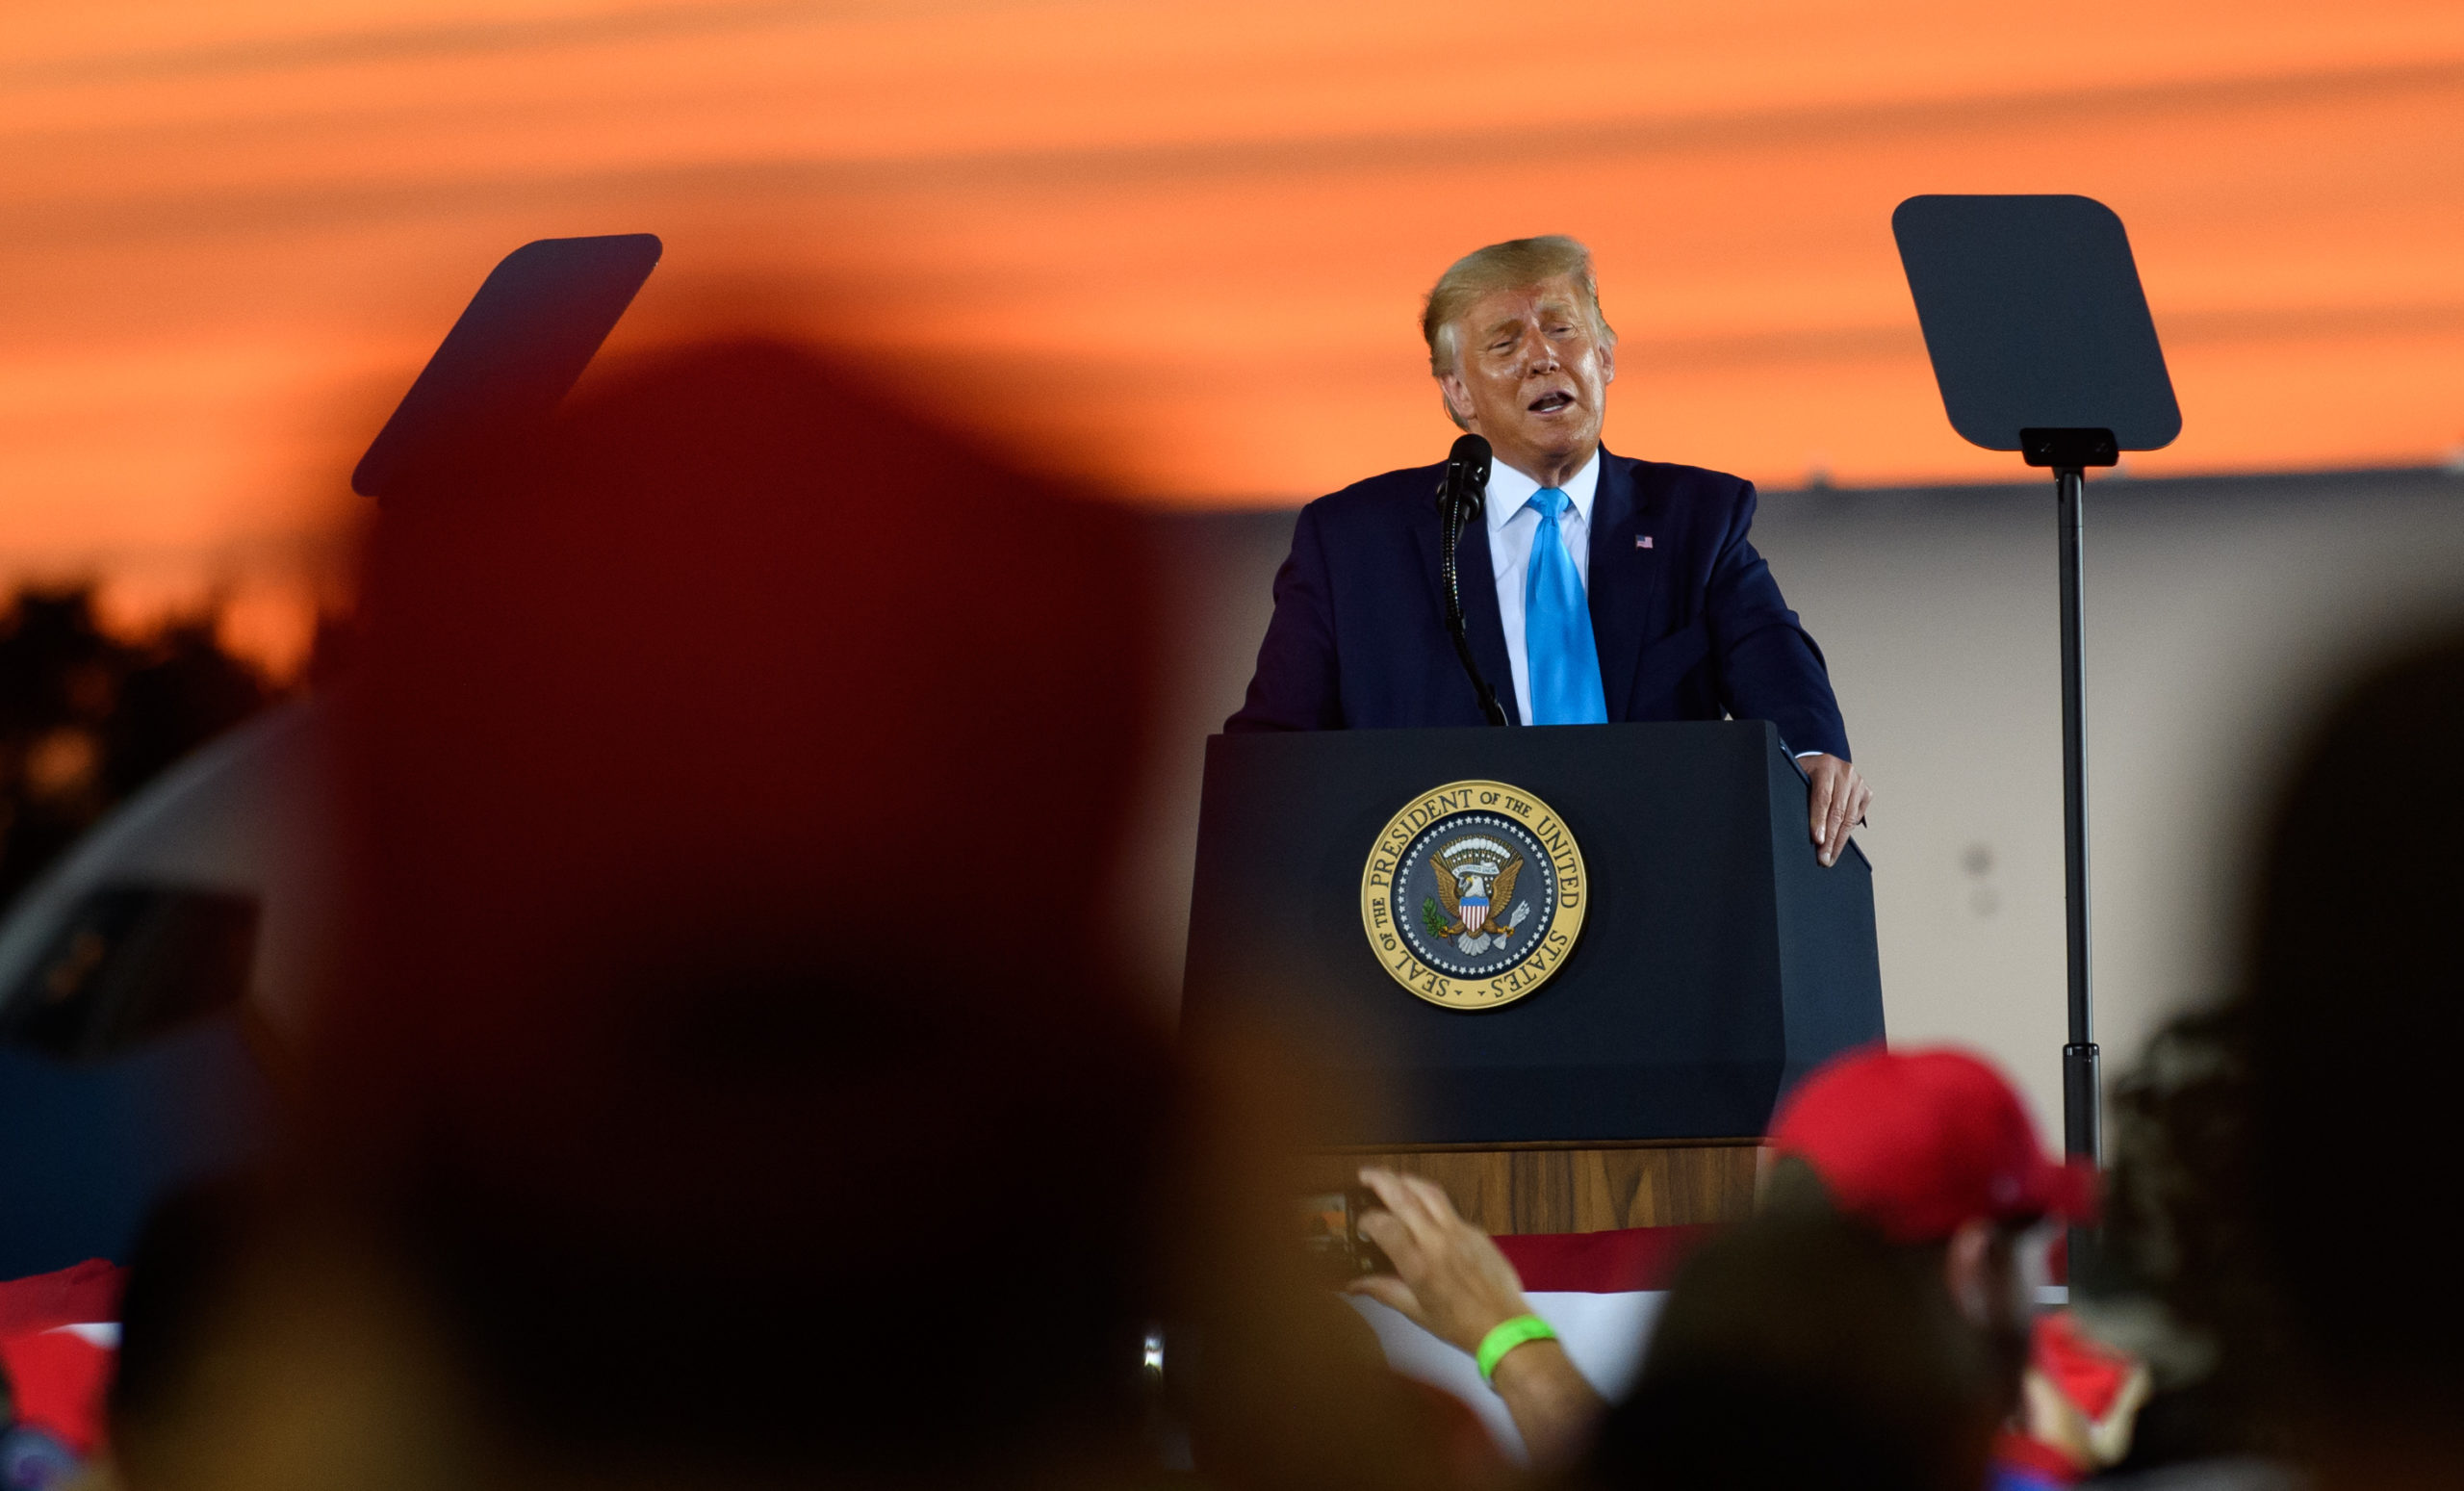 LATROBE, PA - SEPTEMBER 03: President Donald Trump speaks to supporters at a campaign rally at Arnold Palmer Regional Airport on September 3, 2020 in Latrobe, Pennsylvania. Trump won Pennsylvania in the 2016 election by a narrow margin. (Photo by Jeff Swensen/Getty Images)